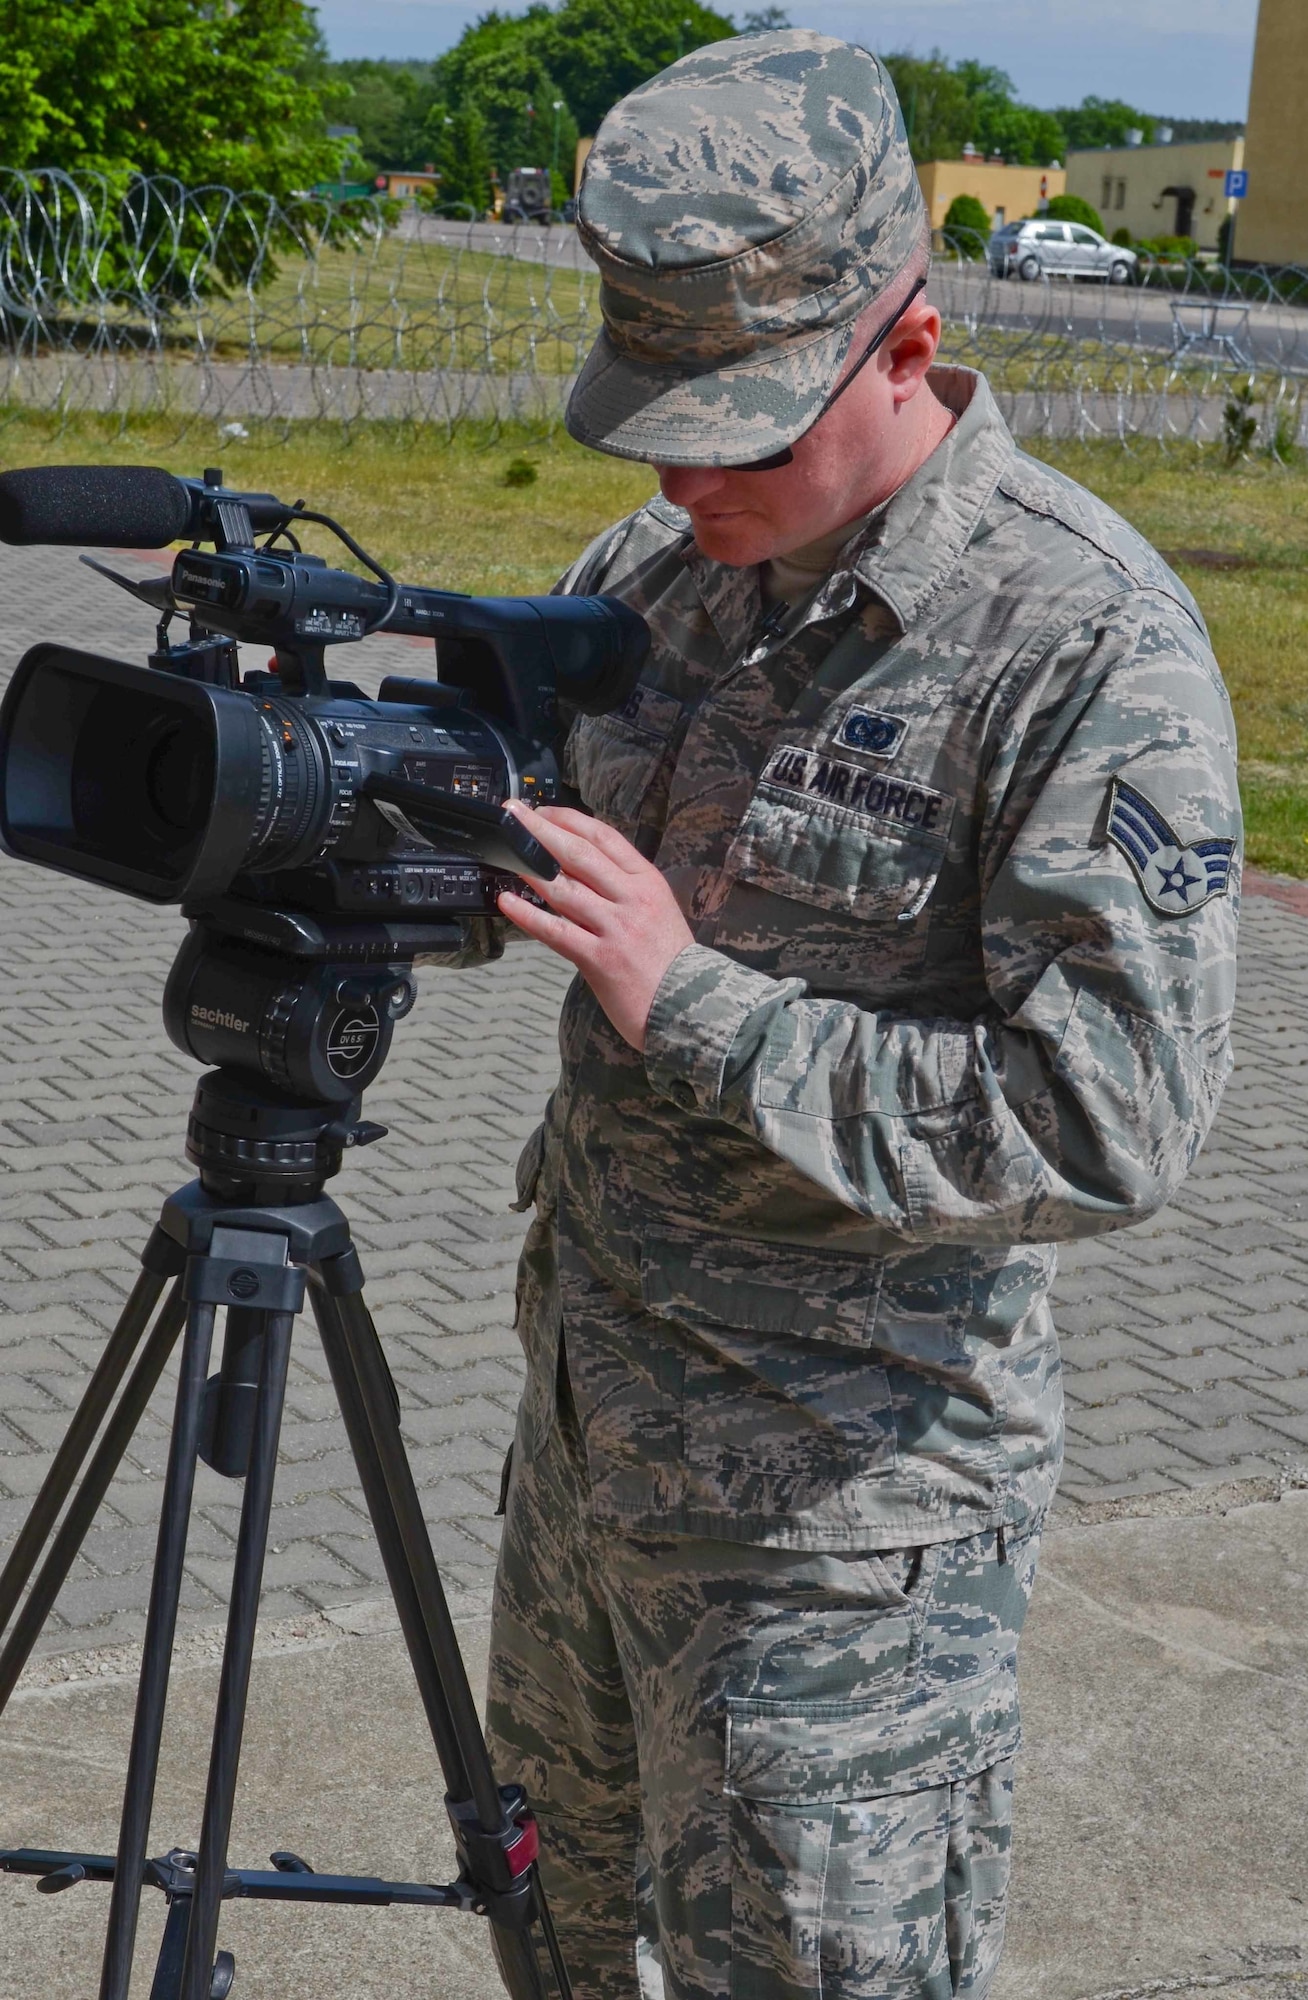 Senior Airman Steven Adkins, a broadcast journalist assigned to American Forces Network, Spangdahlem Air Base, Germany, focuses his video camera during an assignment for Saber Strike 15 on June 7, 2015, in the Drawsko Pomorskie Training Area in Poland. Saber Strike is a long-standing U.S. Army Europe-led cooperative training exercise. This year’s exercise objectives facilitate cooperation amongst the U.S., Estonia, Latvia, Lithuania, and Poland to improve joint operational capability in a range of missions as well as preparing the participating nations and units to support multinational contingency operations. (U.S. Army photo by Sgt. Brandon Anderson, 13th Public Affairs Detachment/Released.)